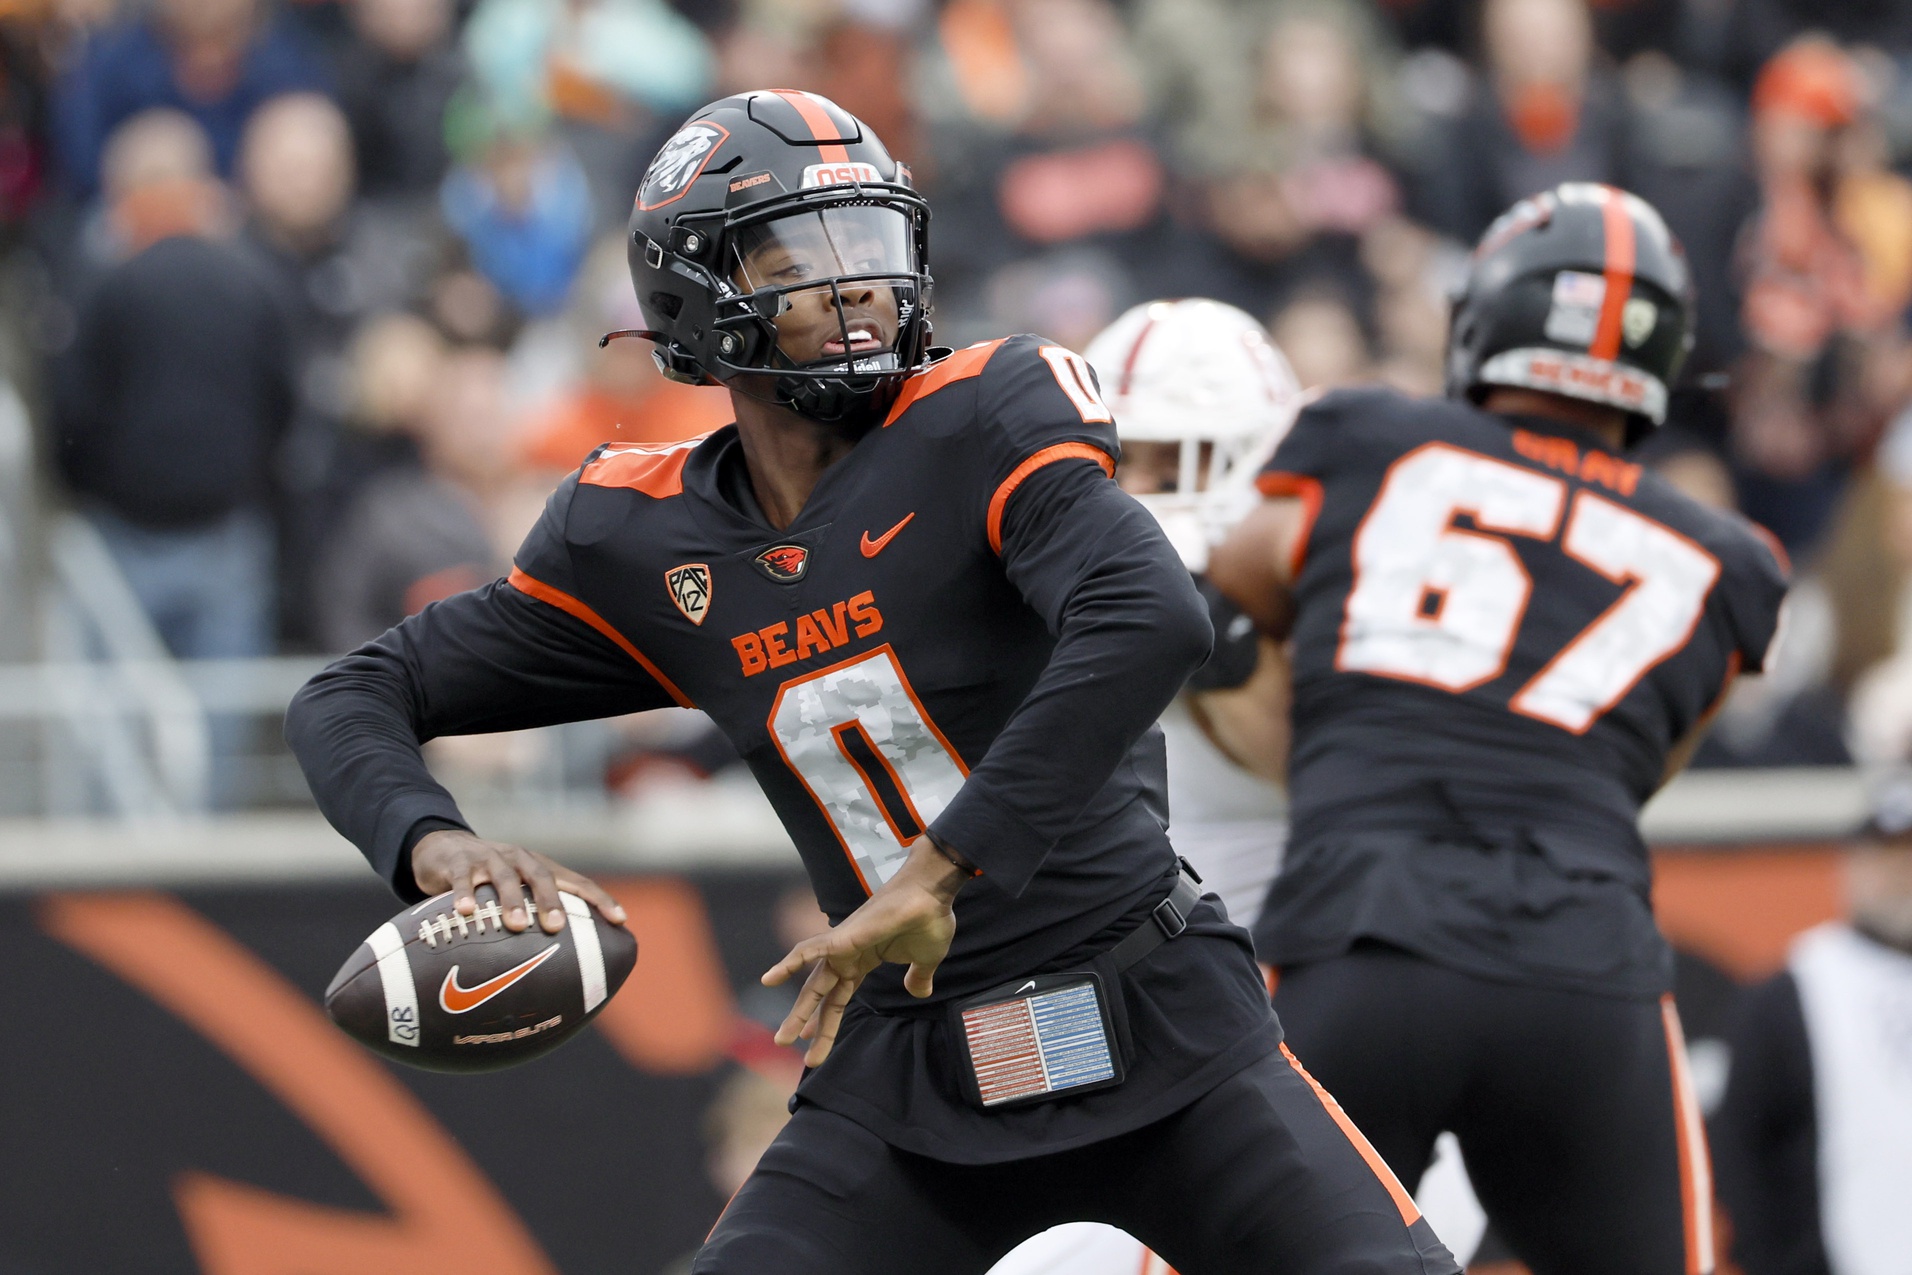 Aidan Chiles reportedly leaving Oregon State after one year, linked to Michigan State